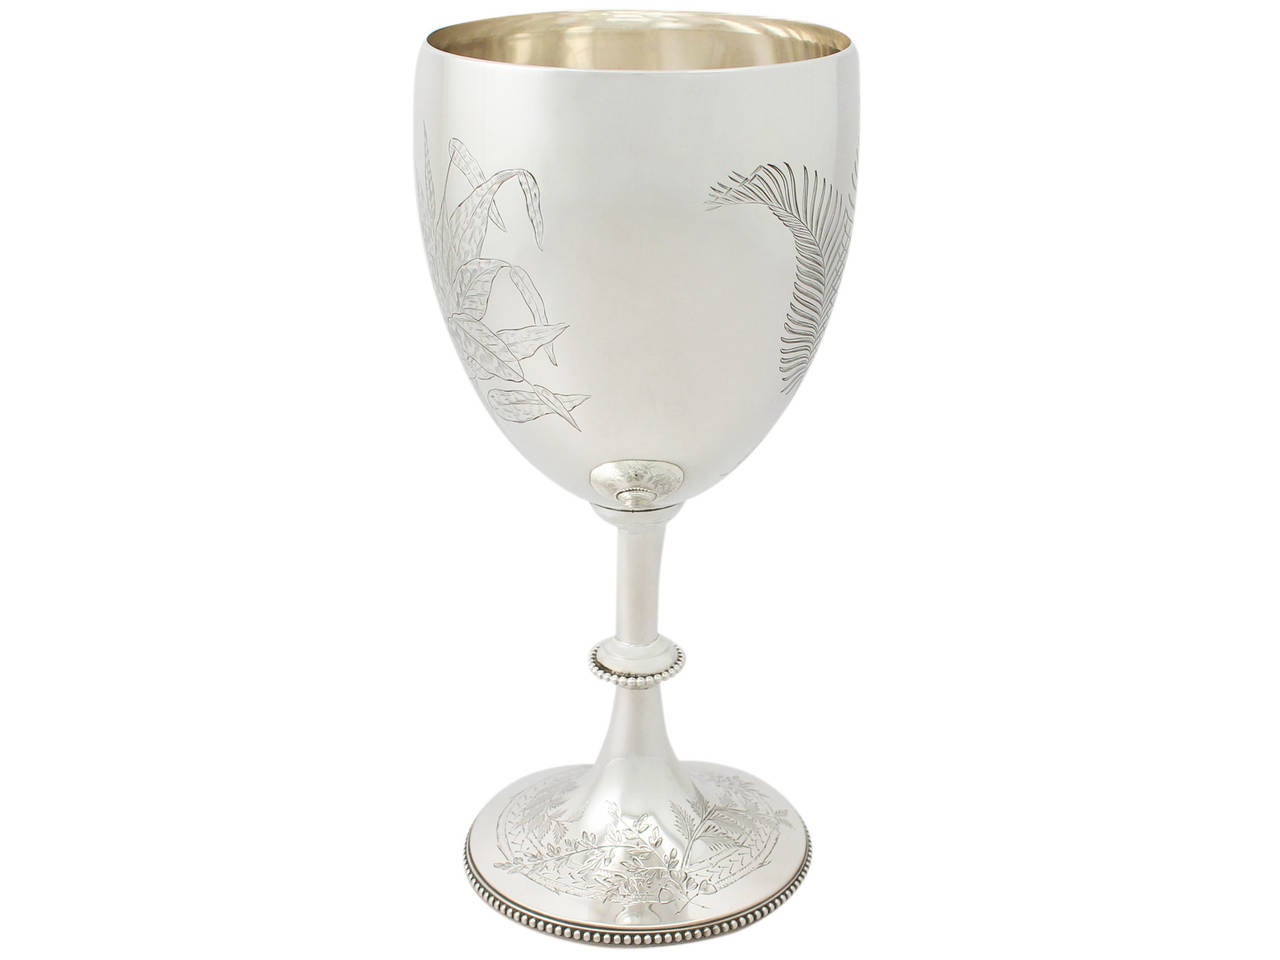 An exceptional, fine and impressive antique Victorian English sterling silver presentation cup; an addition to our silver cups and trophies collection.

This exceptional antique Victorian sterling silver presentation cup has a circular bell shaped